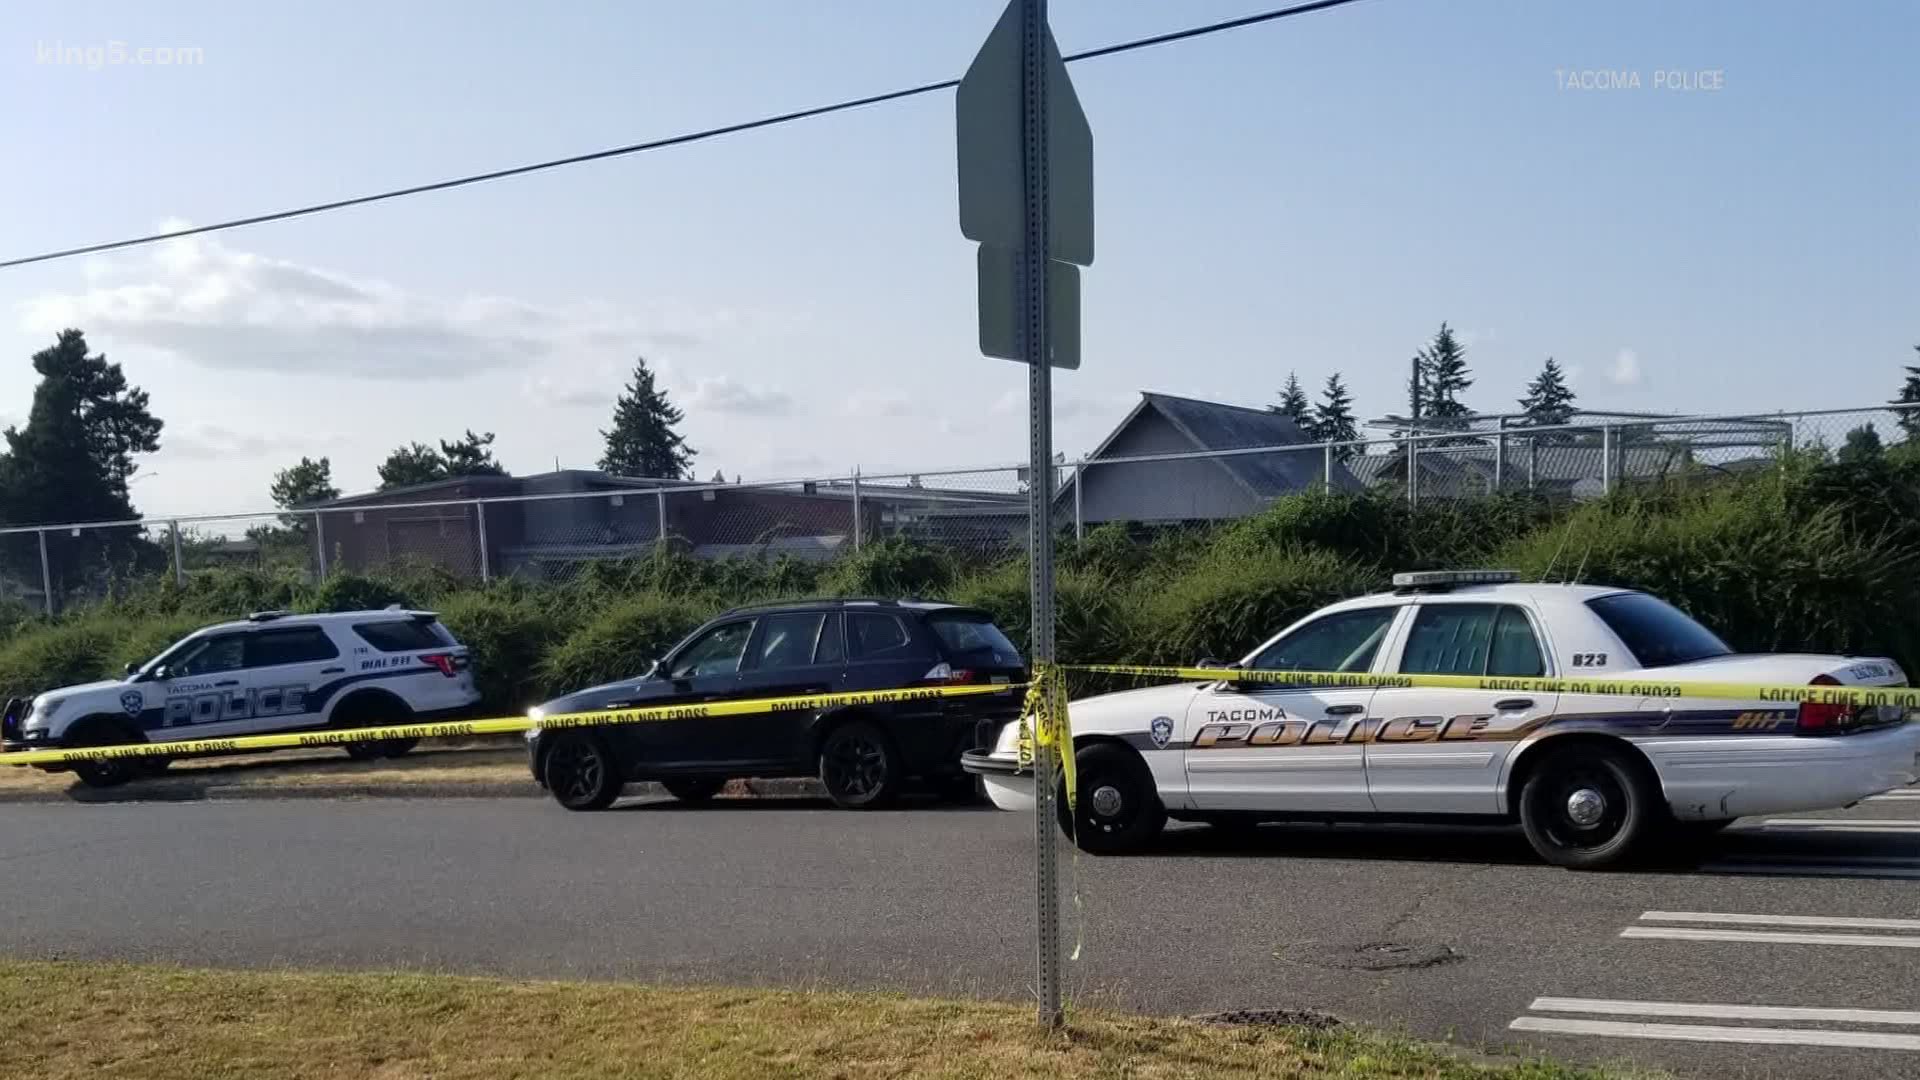 A 28-year-old man was found shot to death inside a car. Tacoma police said there were multiple shooters involved and it appeared to be a driveby.